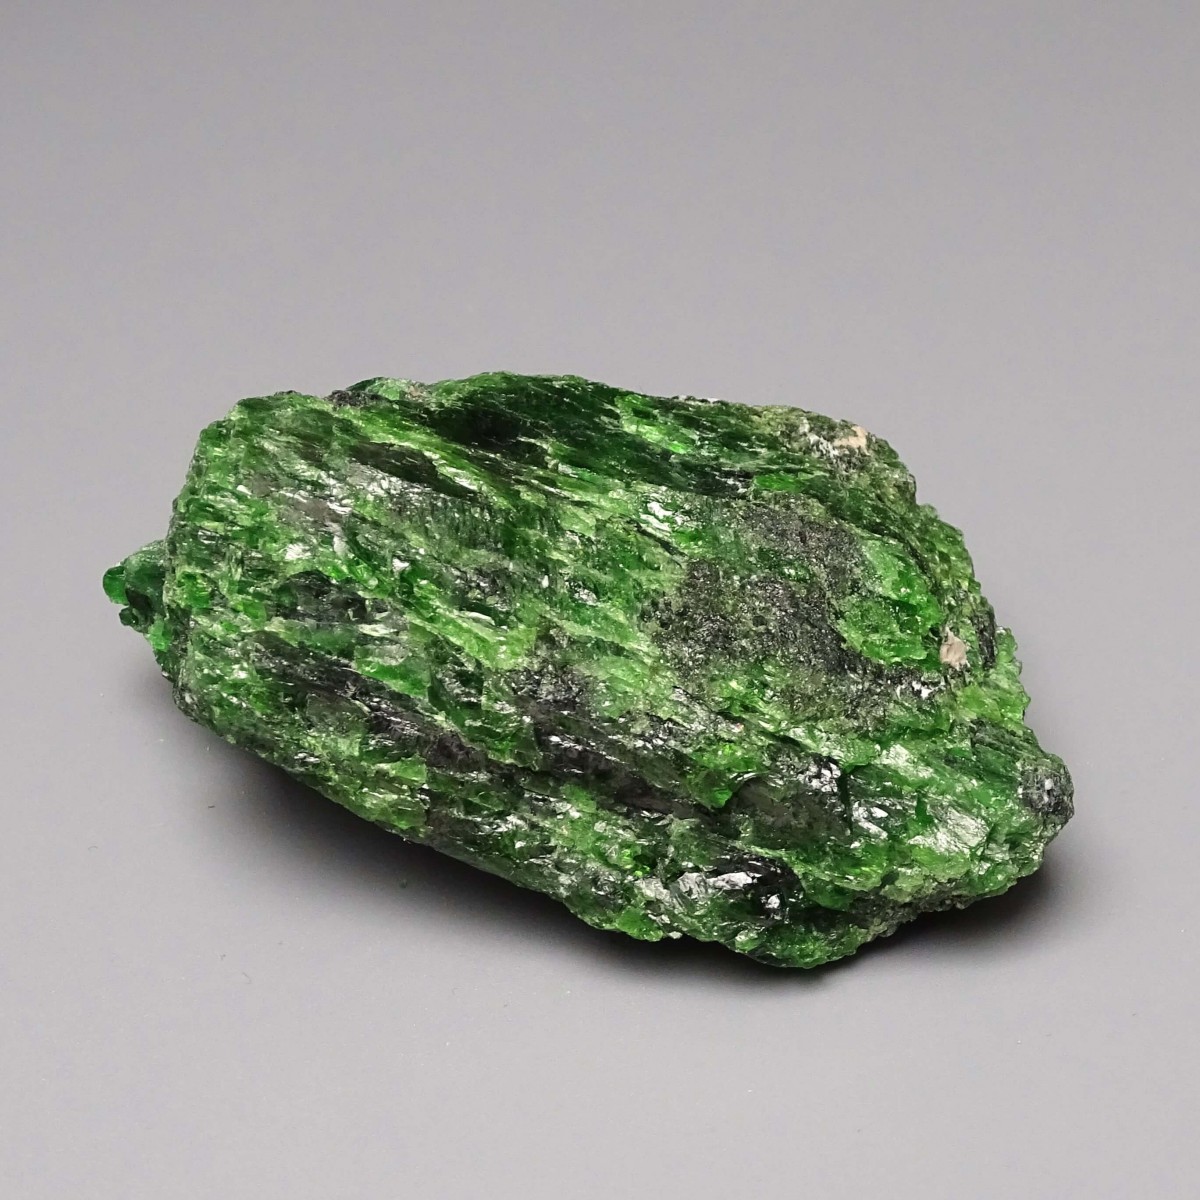 Chromdiopside natural mineral top quality 192g, Russia